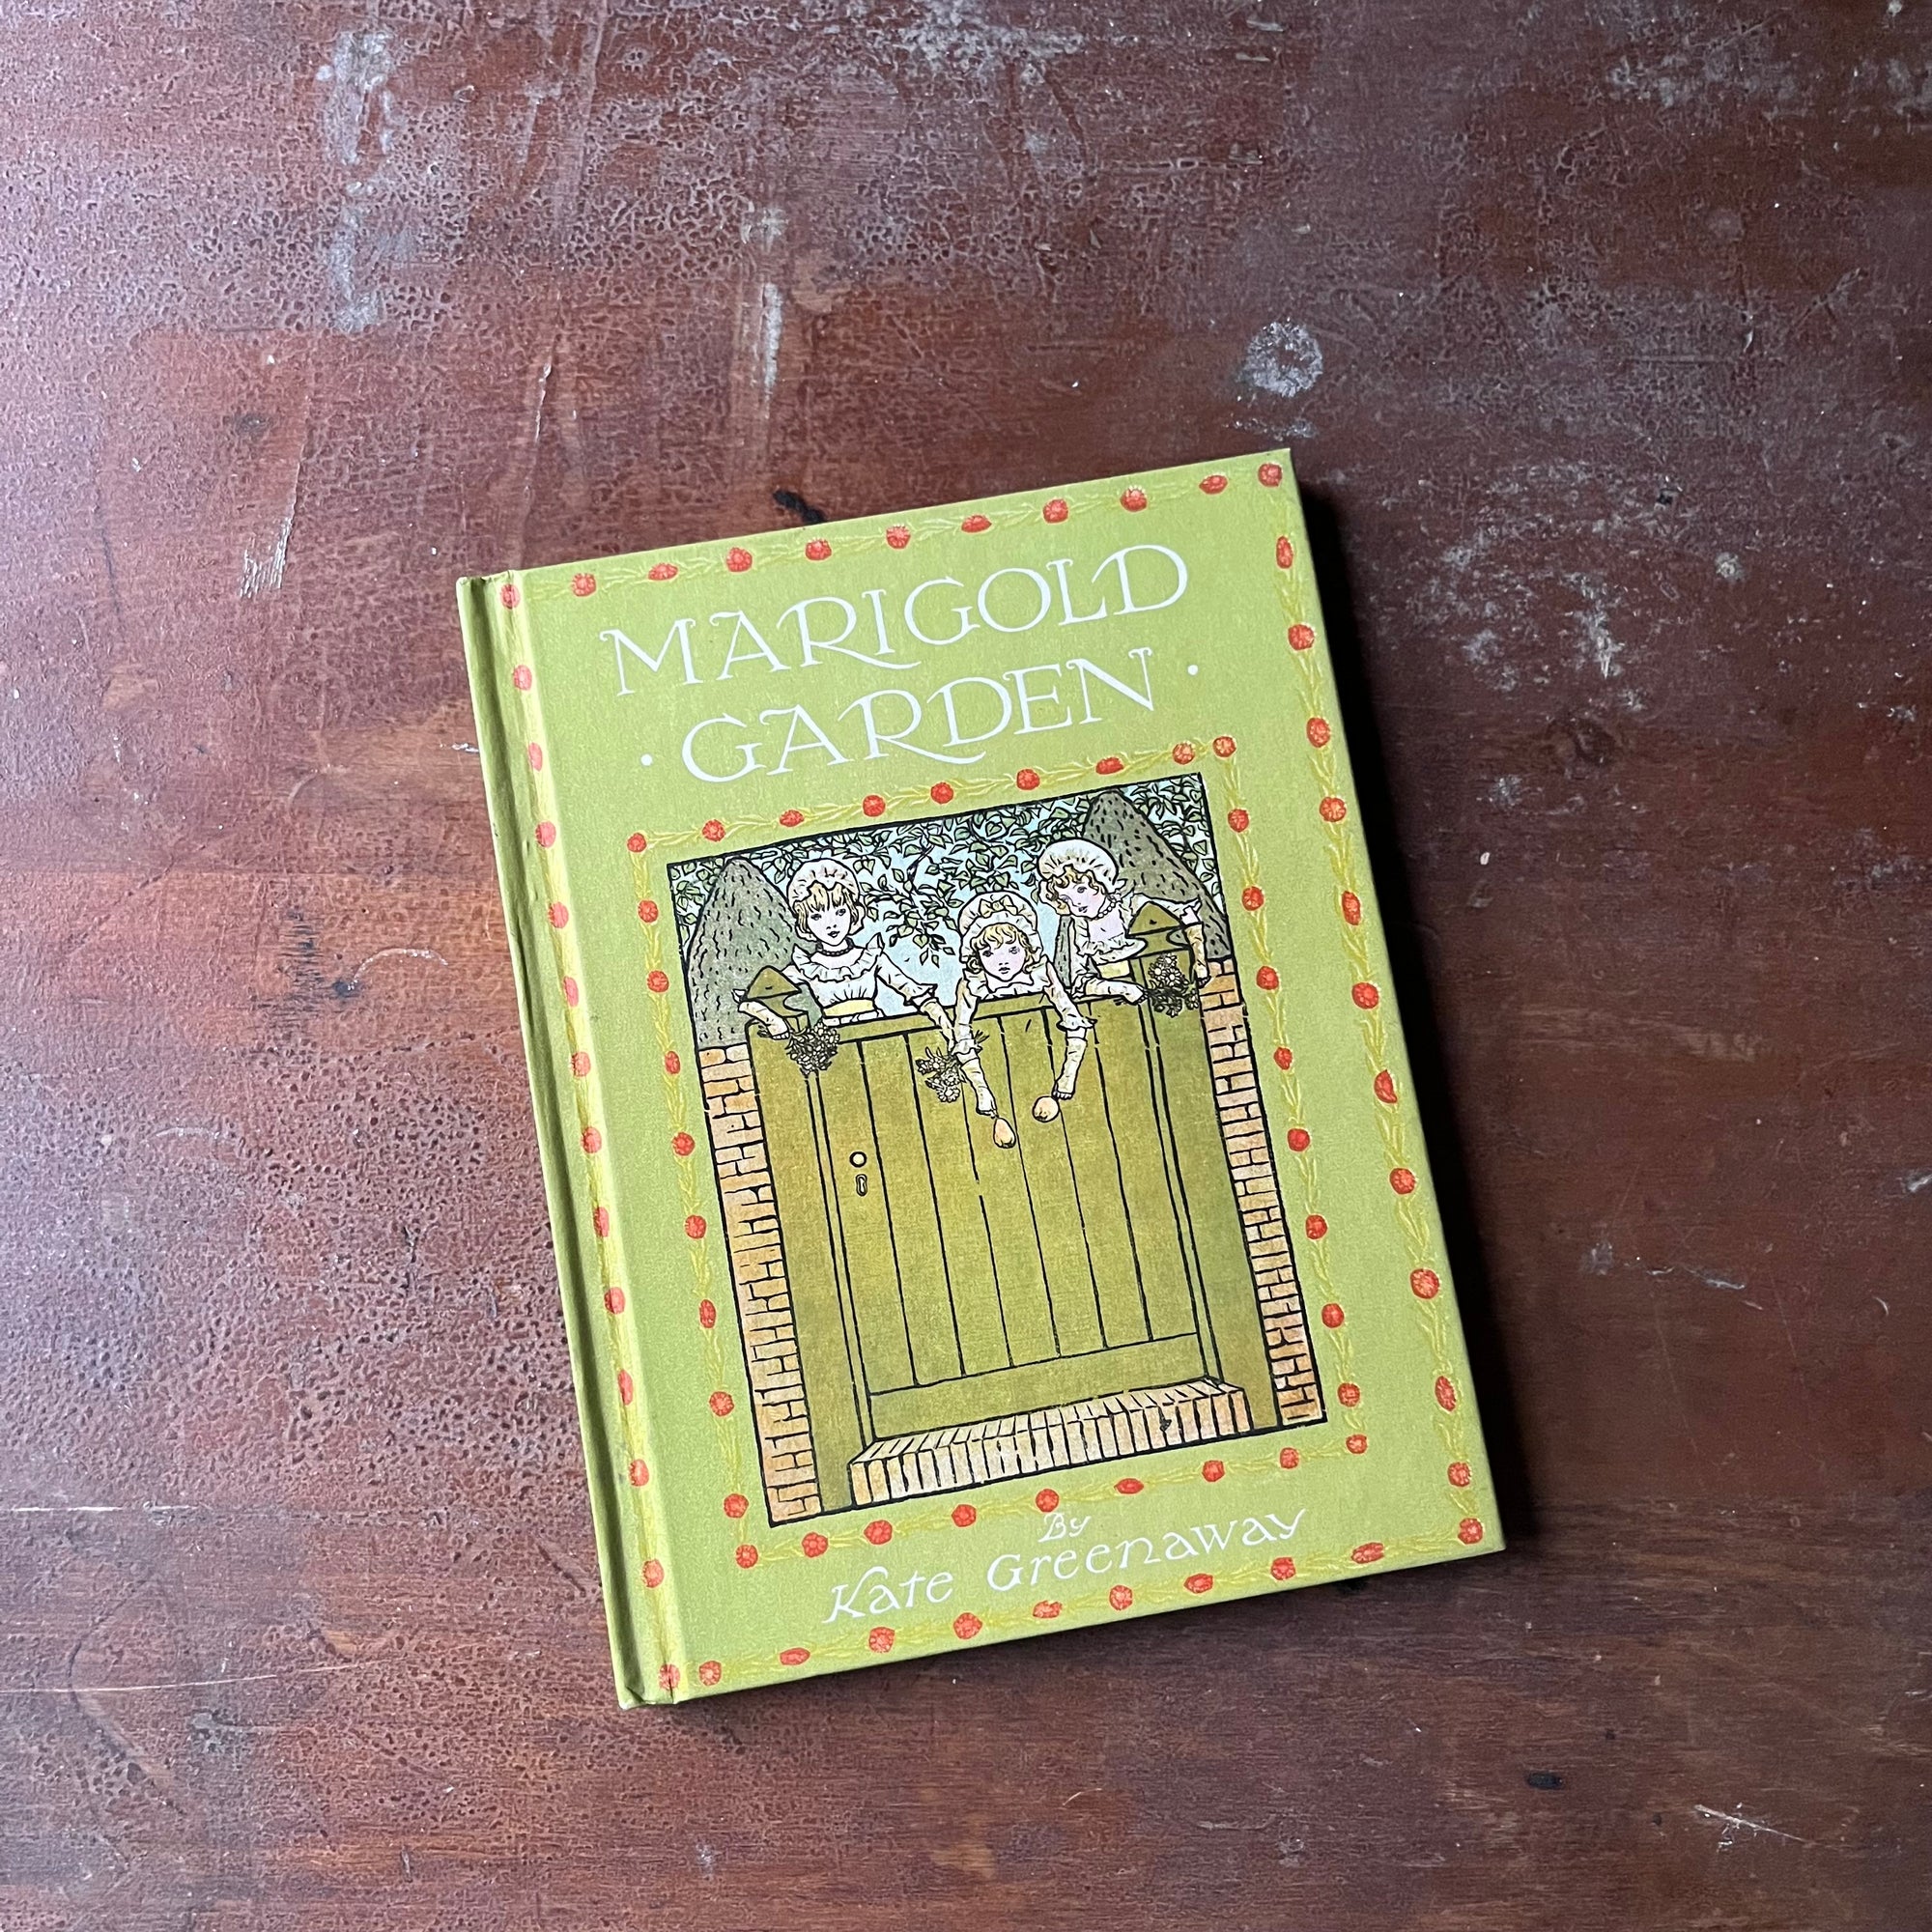 Marigold Garden by Kate Greenaway-Pictures and Rhymes for Children-vintage poems & Nursery Rhymes-view of the front cover